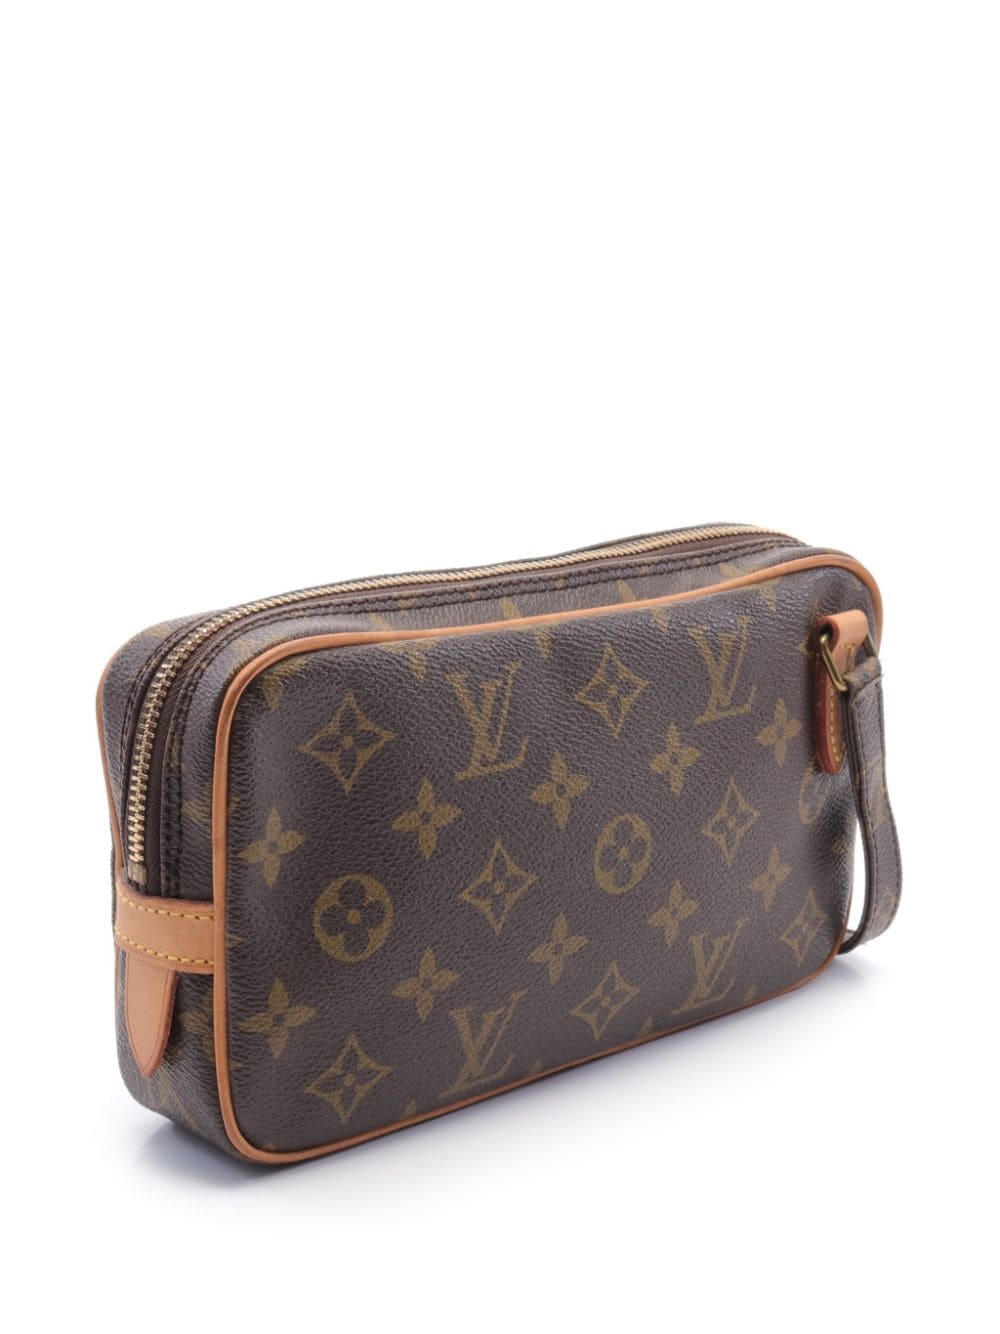 Louis Vuitton Pre-Owned 1988 pre-owned Marly Bandouliere crossbody bag - Bruin